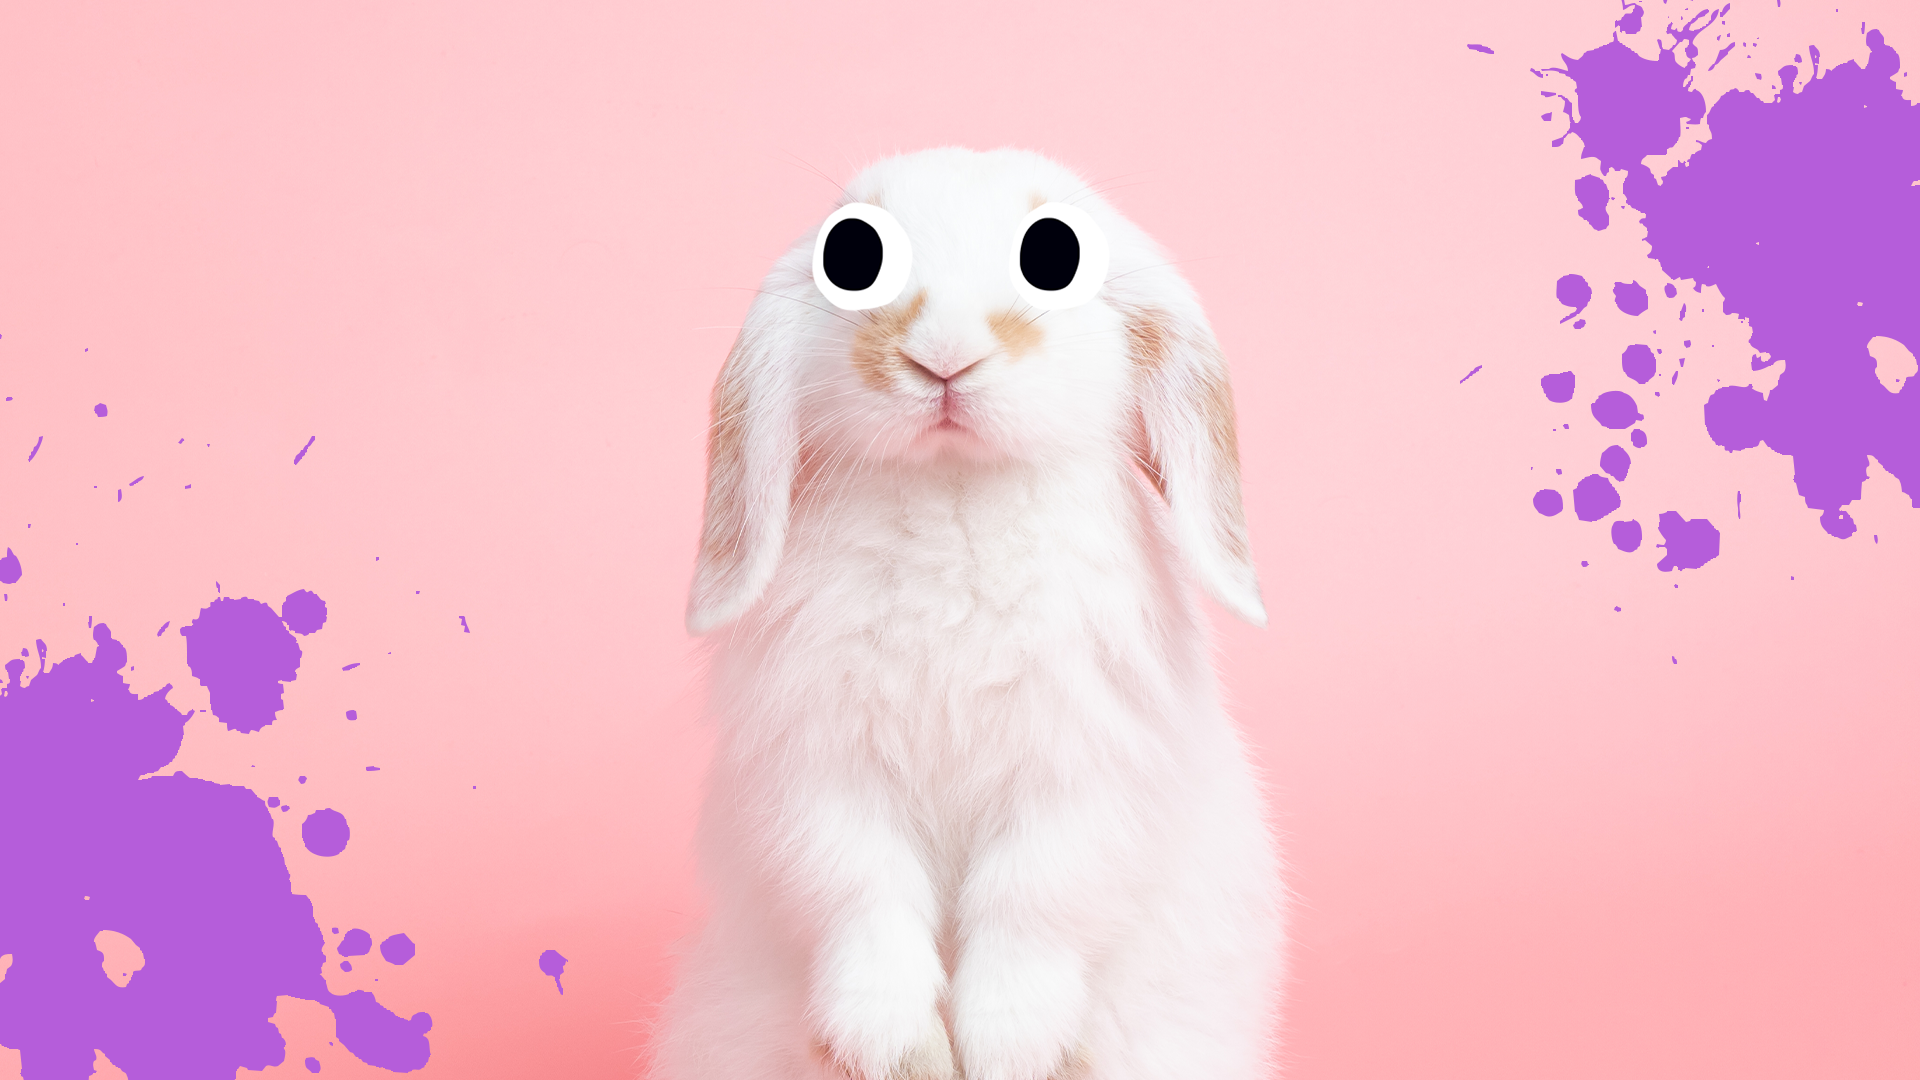 Bunny with splats on pink background